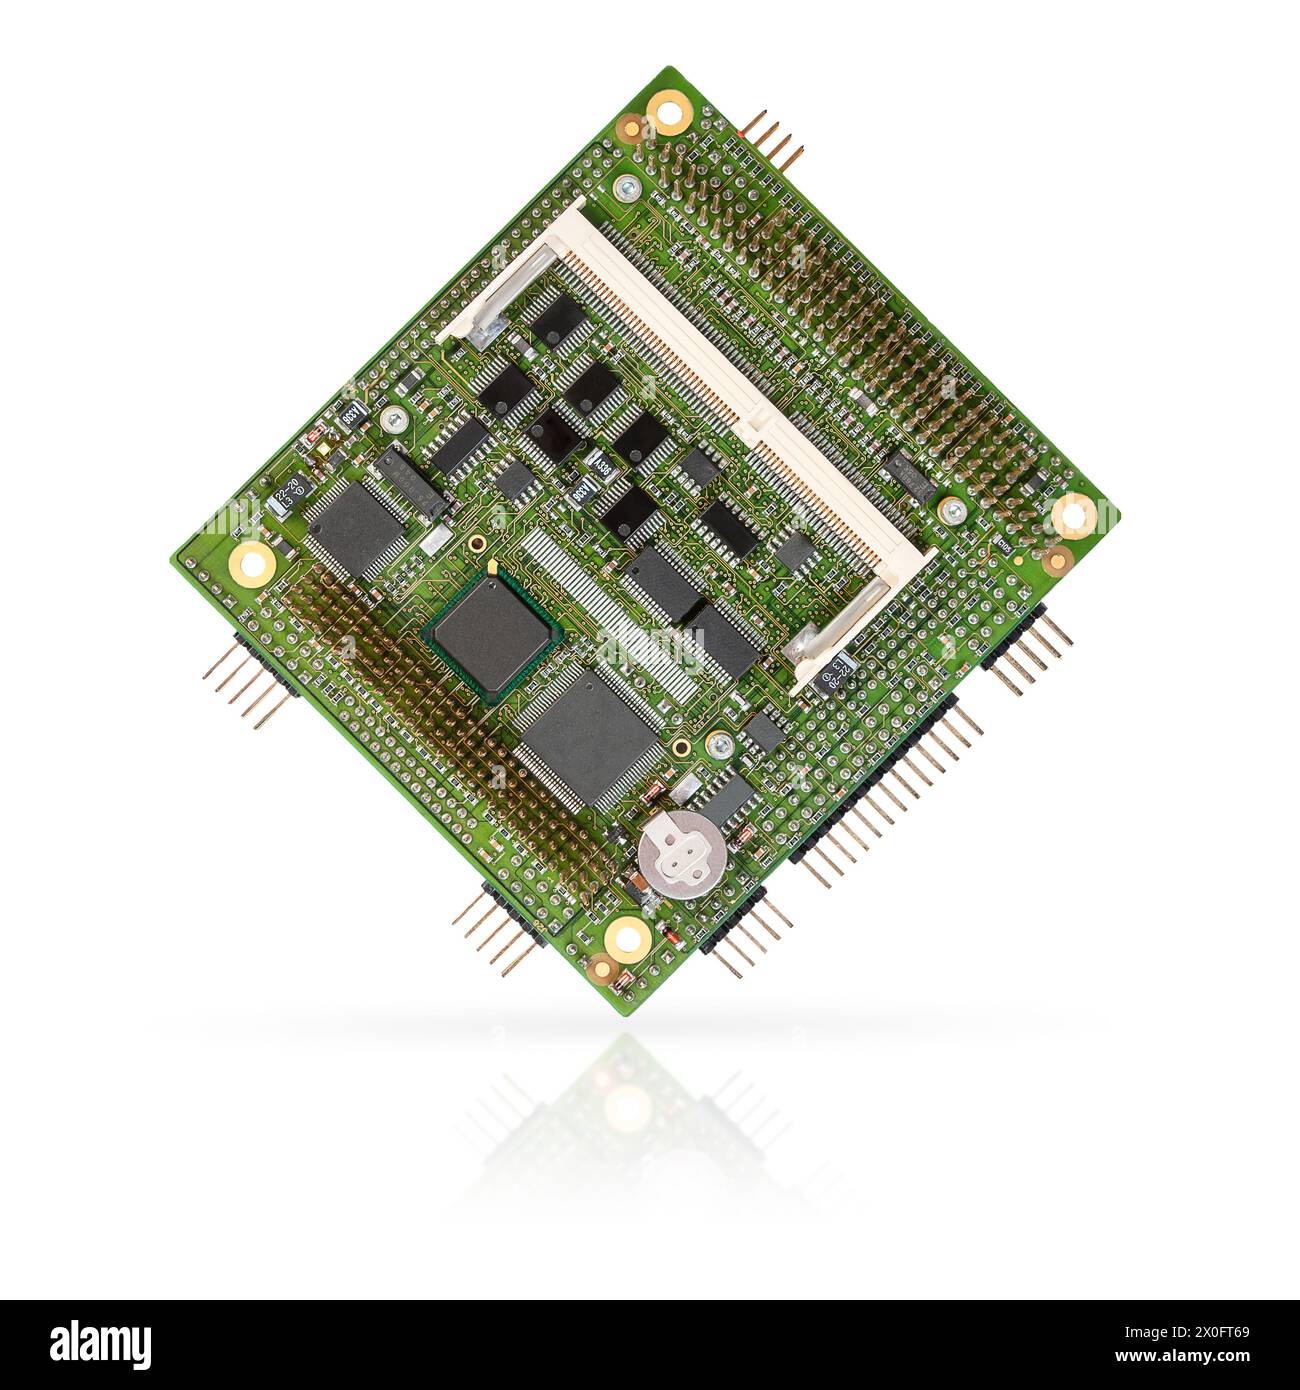 Close-up of an embedded PC/104+ CPU module with integrated chips and connectors, isolated on a white background. Stock Photo